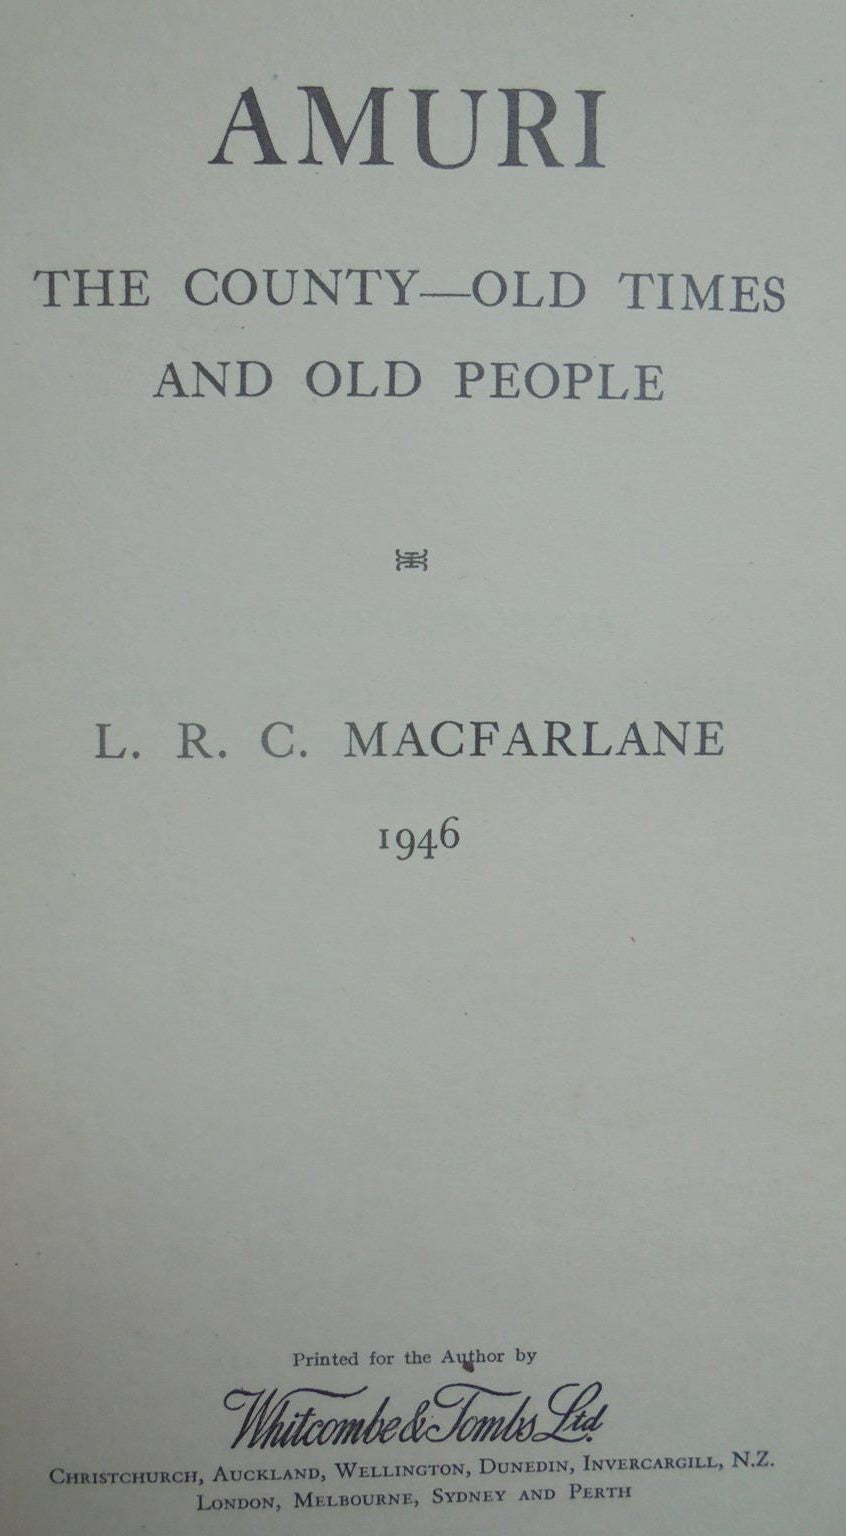 Amuri, the County - Old Times and Old People. By L. R. C. MacFarlane.